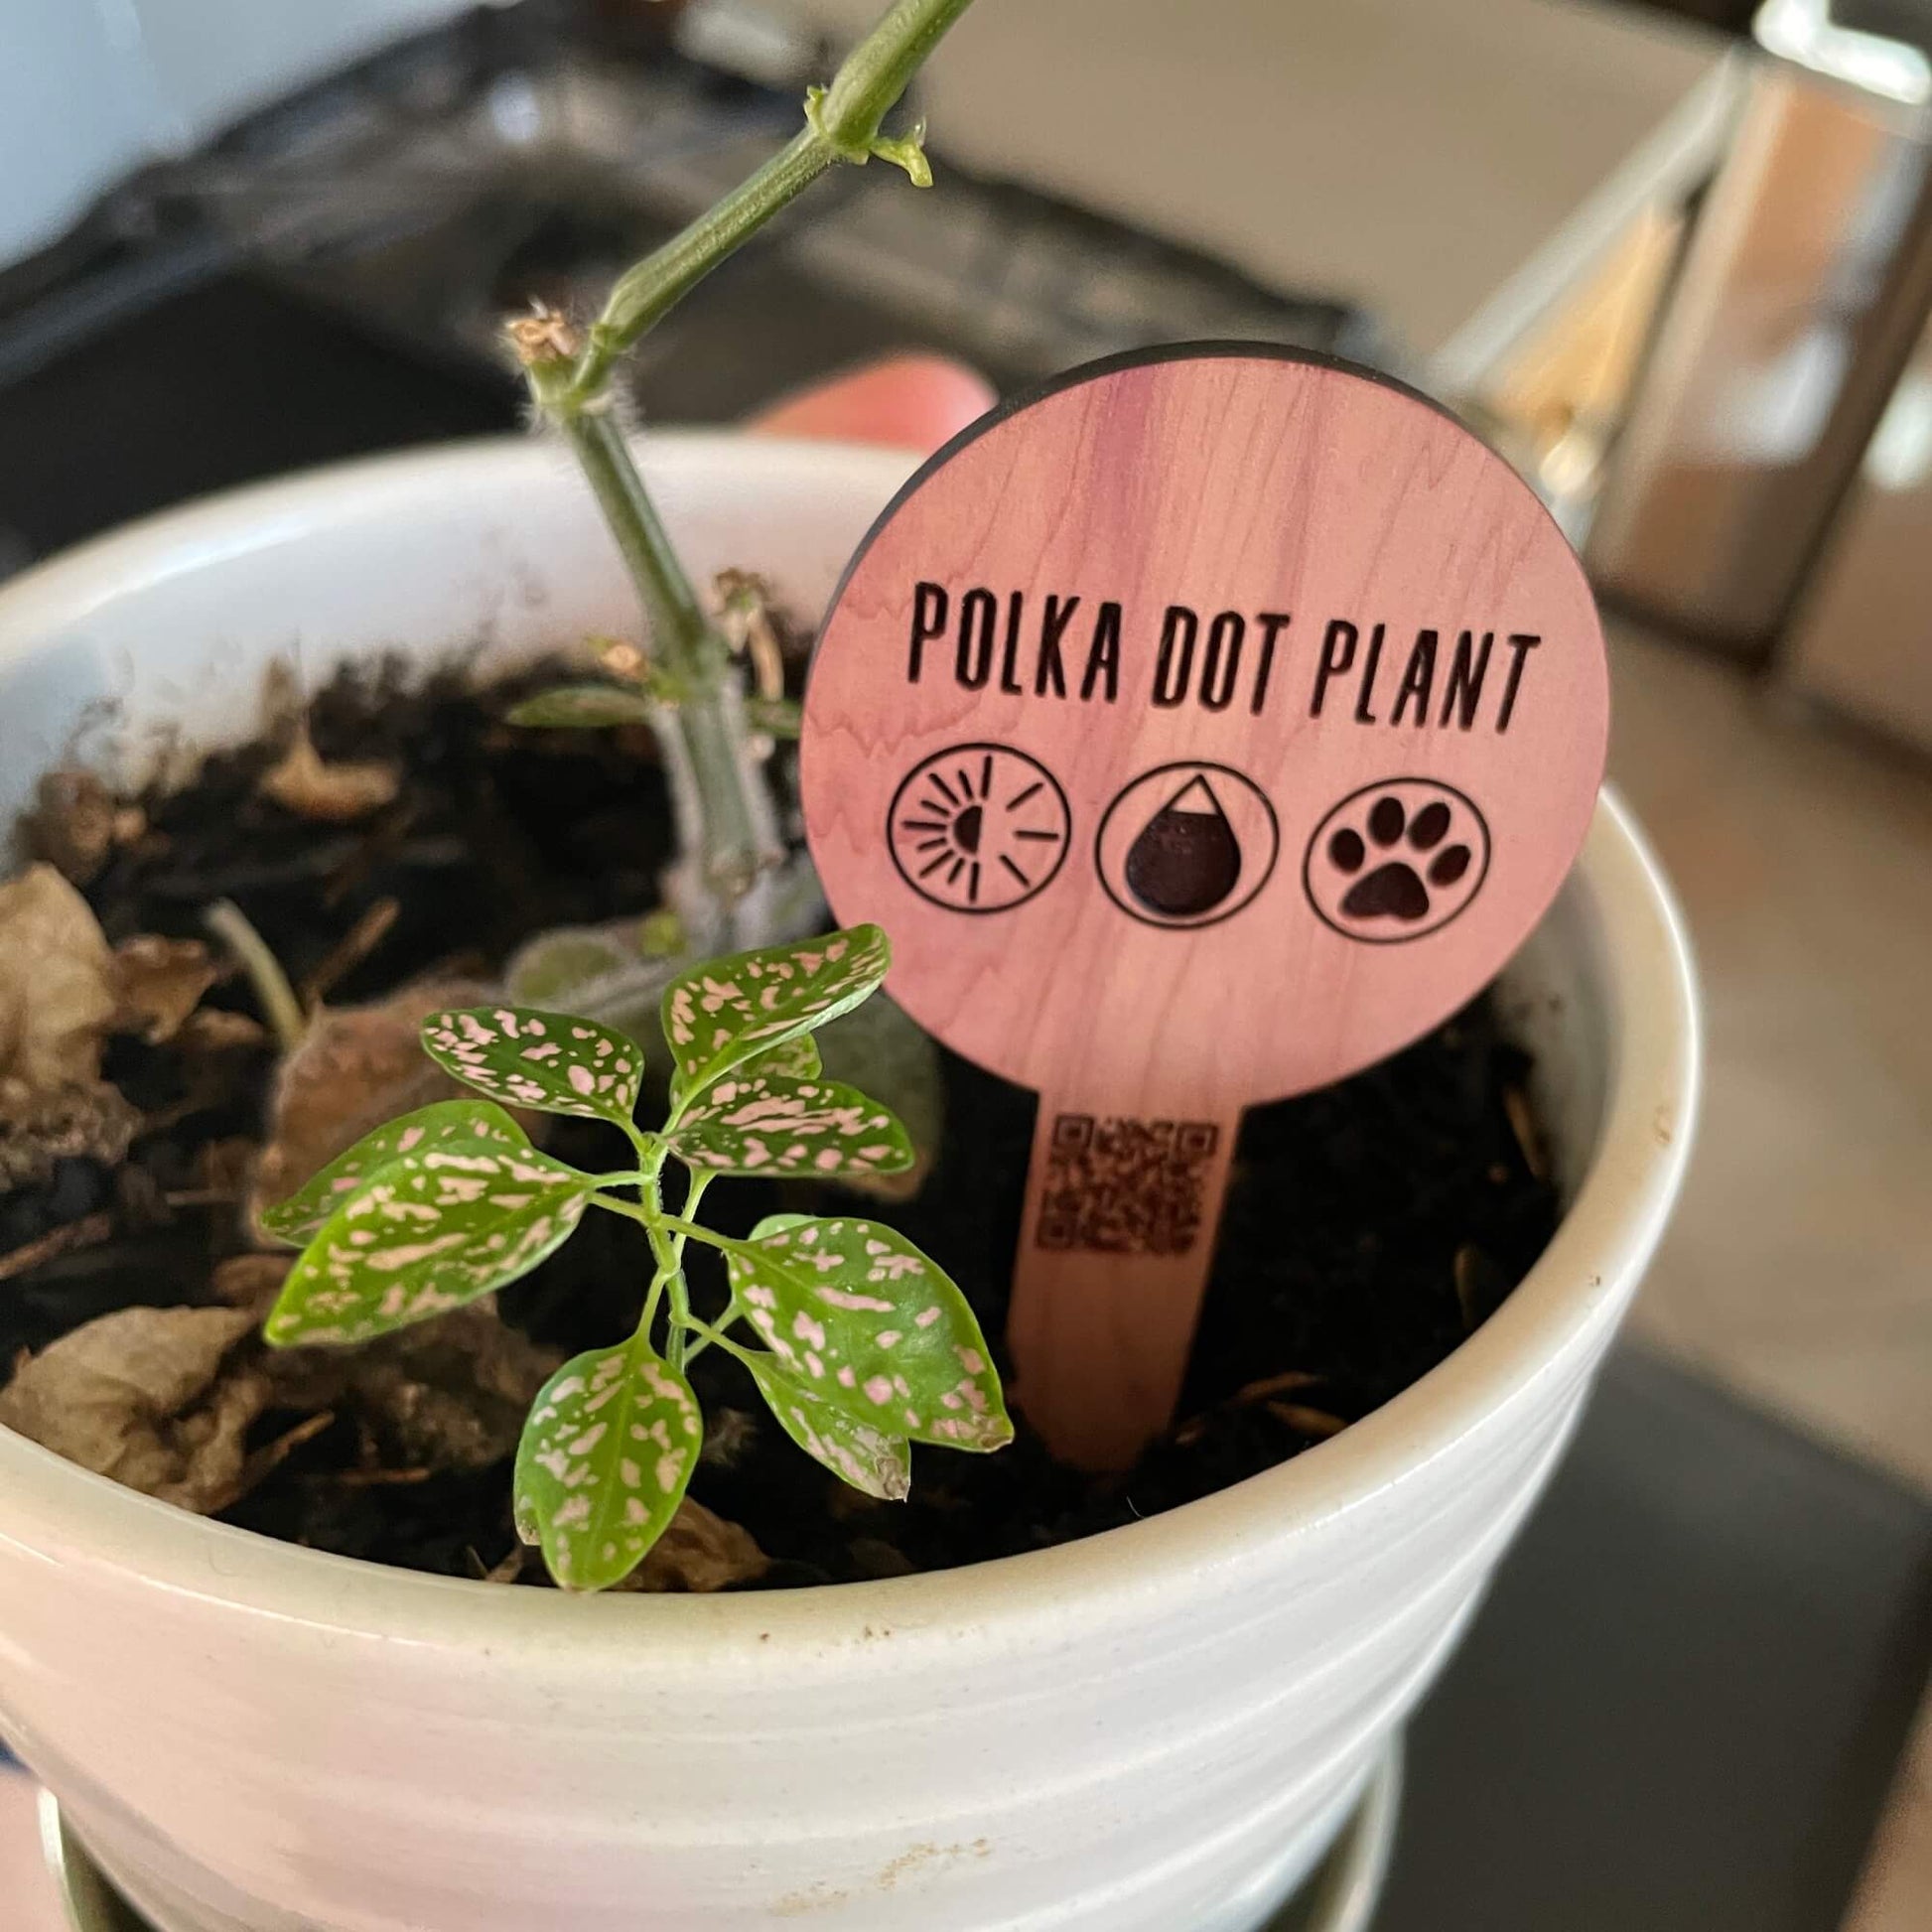 aromatic cedar wood plant care tag with qr code - polka dot plant by LeeMo Designs in Bend Oregon